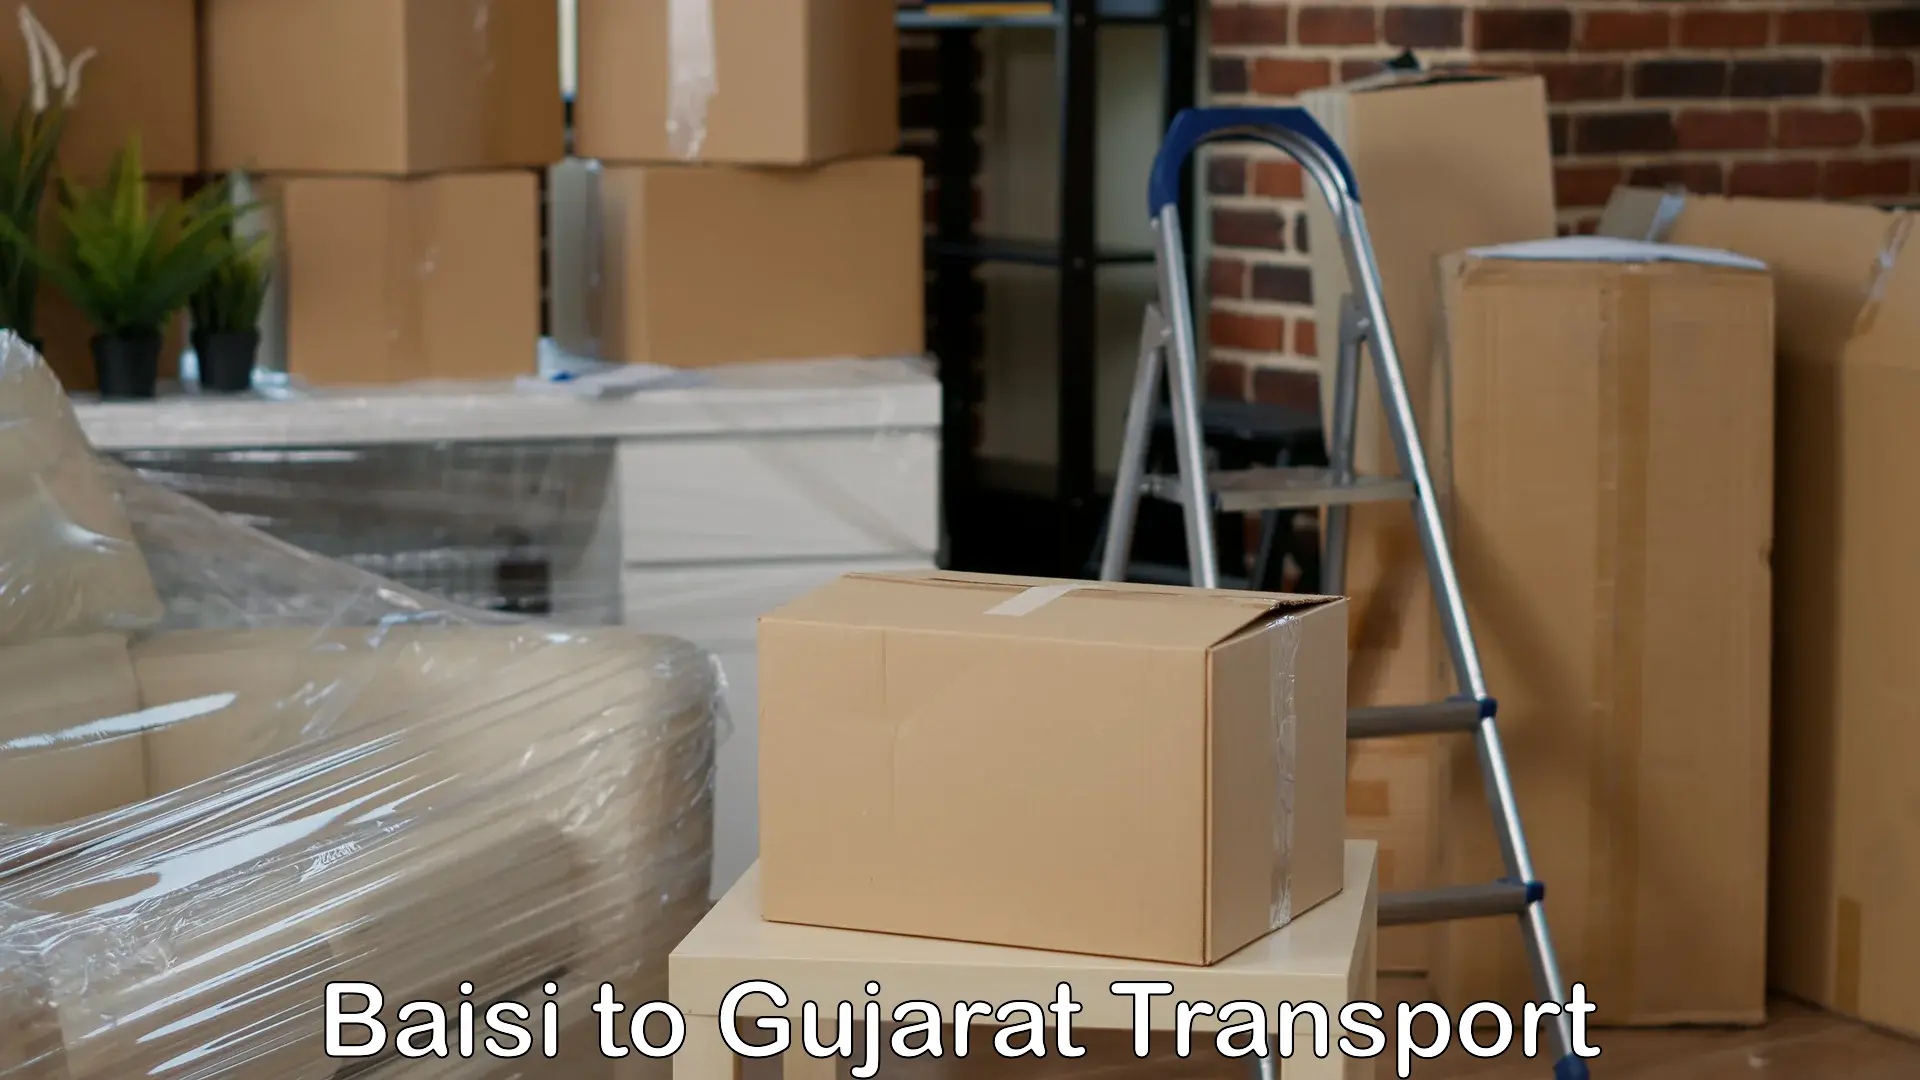 Air freight transport services Baisi to Surat